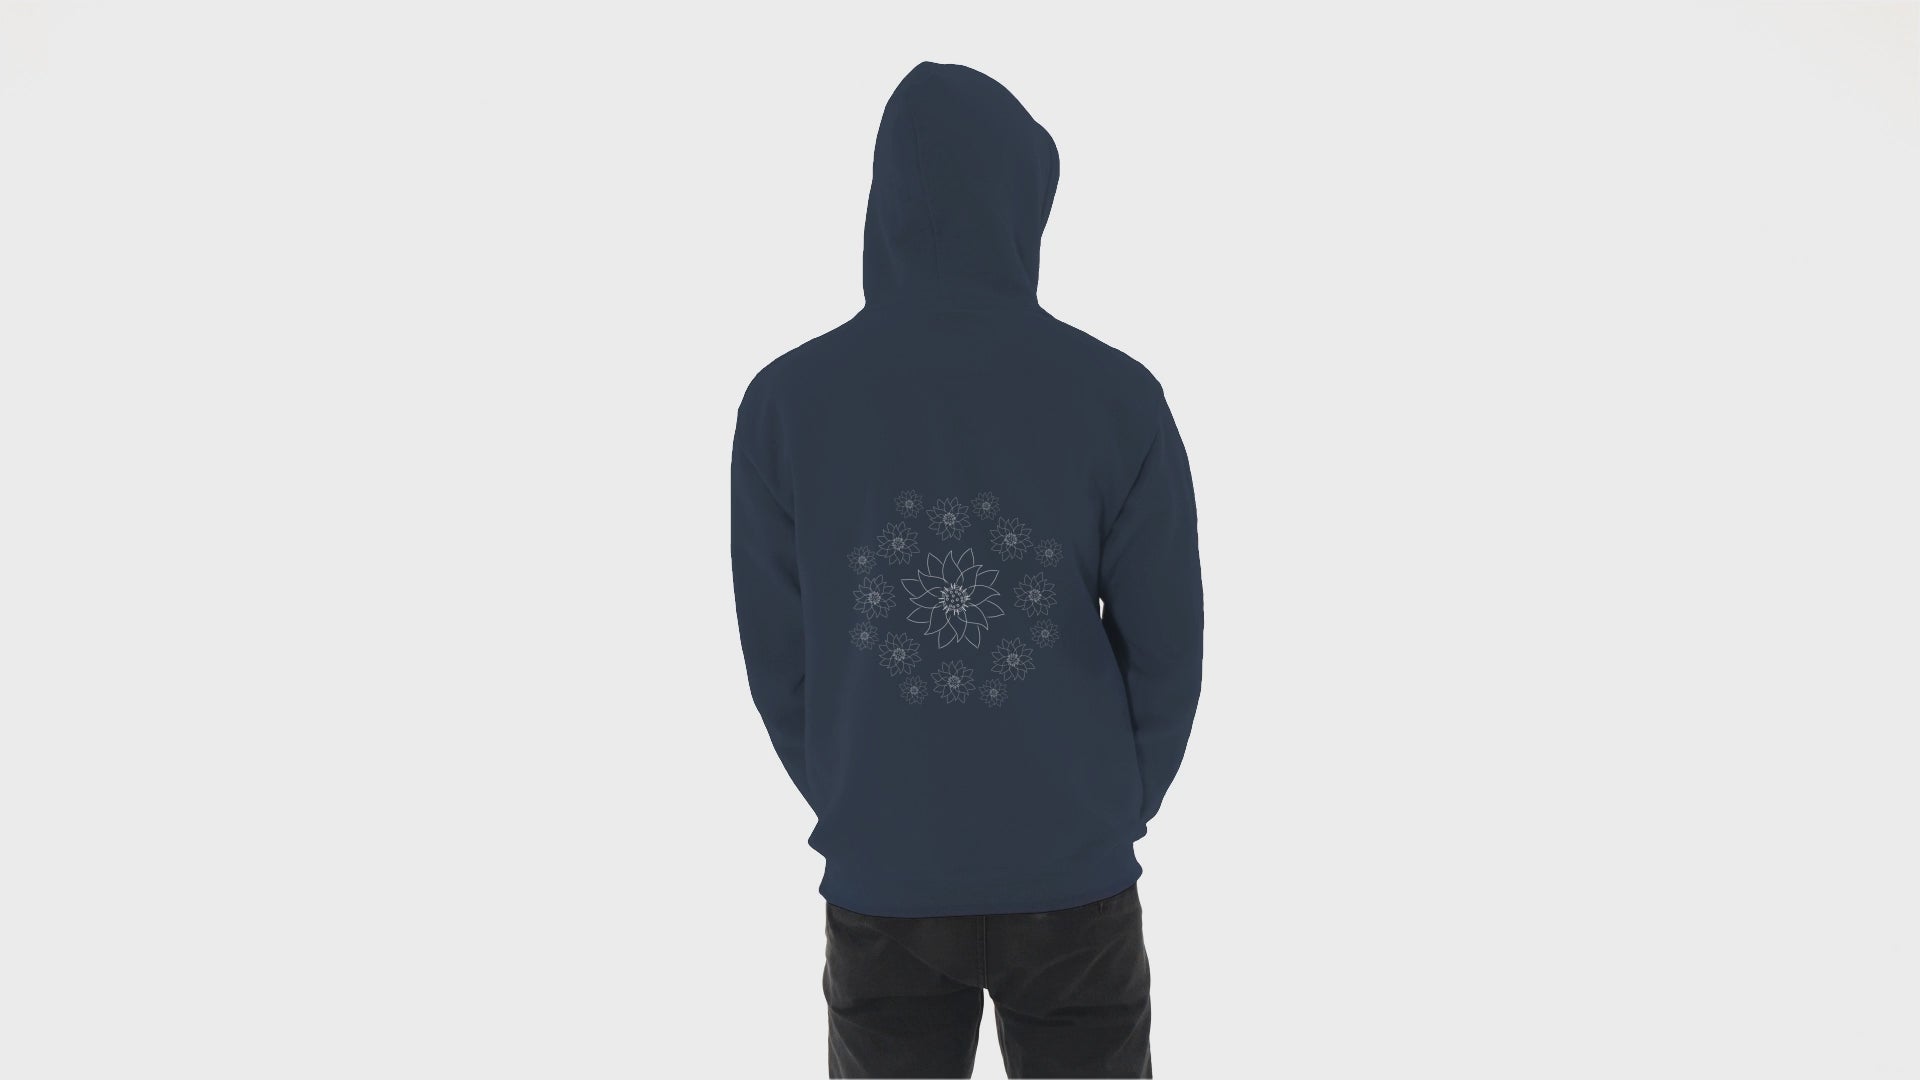 White Lotus Dream | Sustainable Hoodie worn by a man